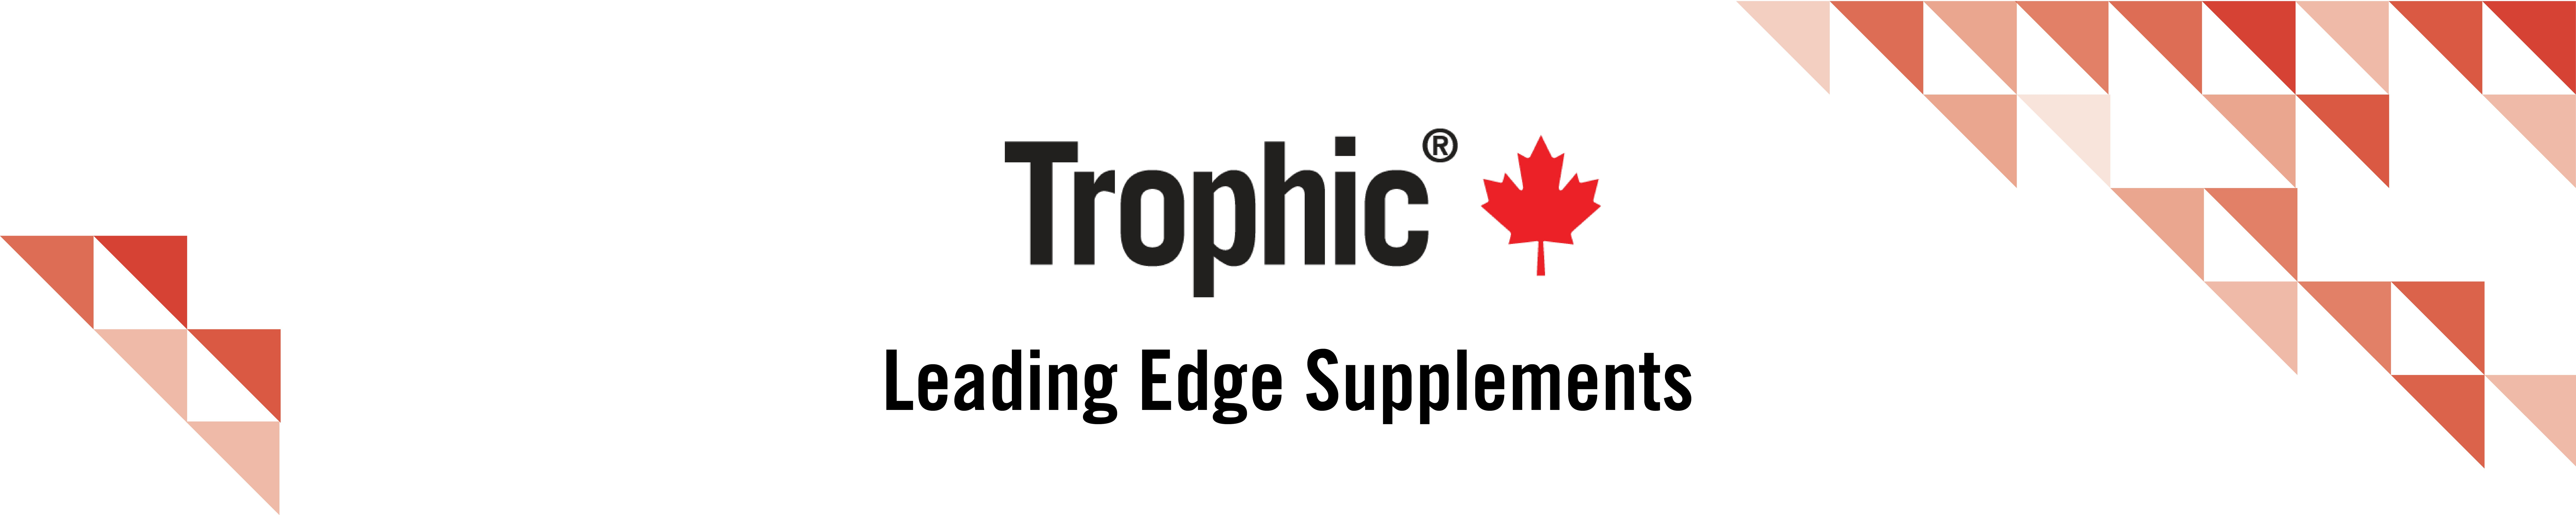 Trophic logo with leading edge supplements written. 